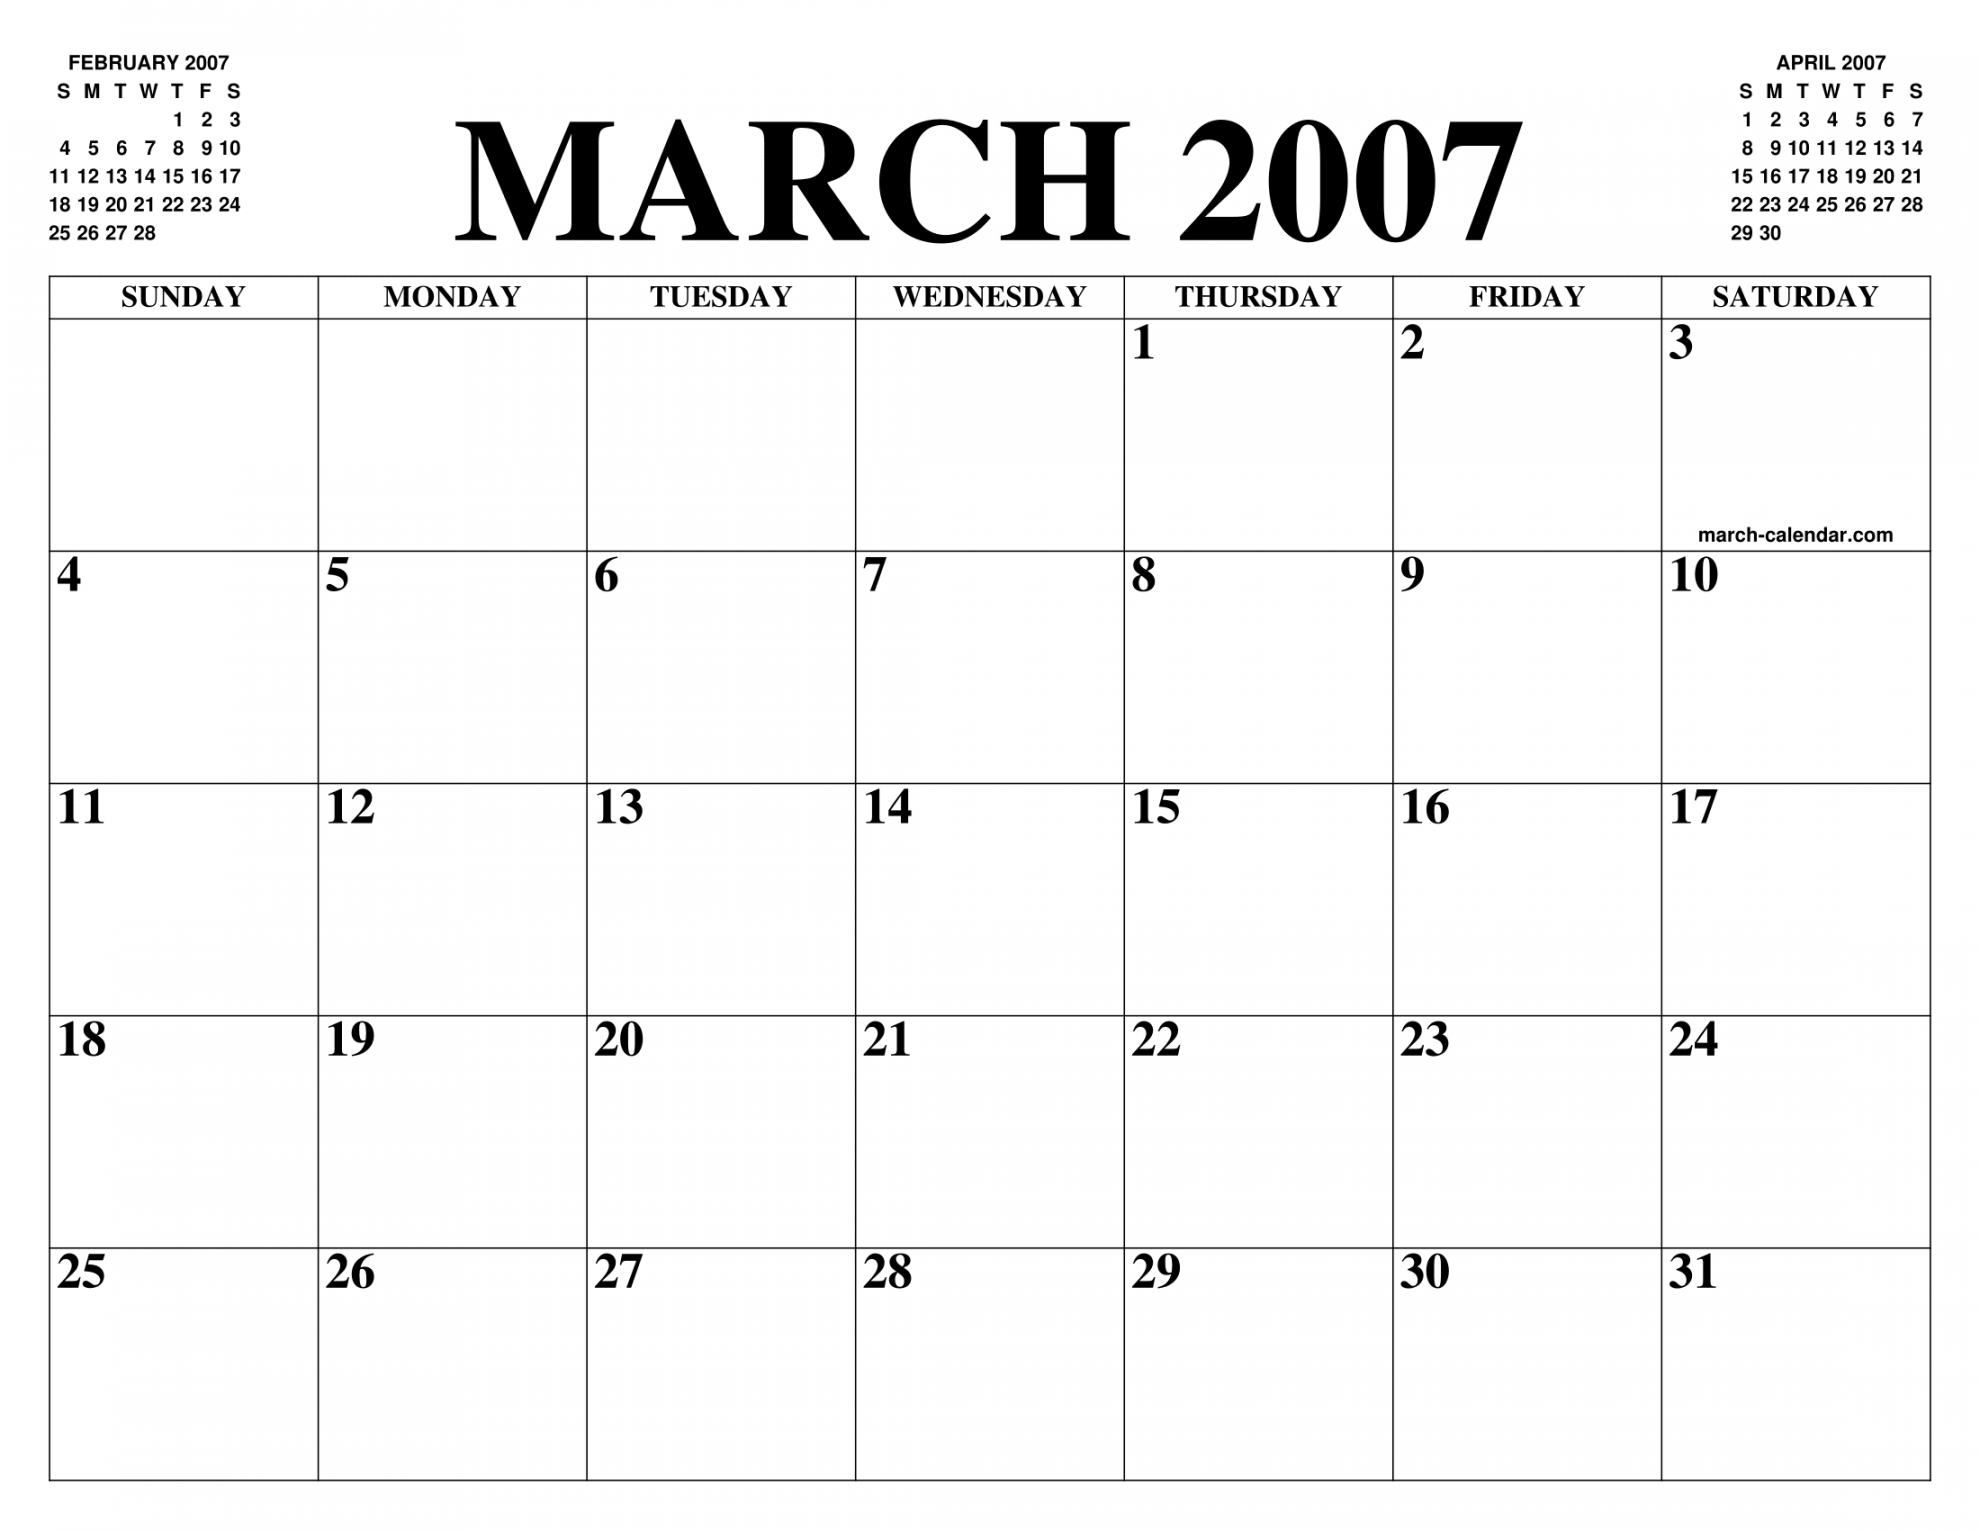 MARCH  CALENDAR OF THE MONTH: FREE PRINTABLE MARCH CALENDAR OF